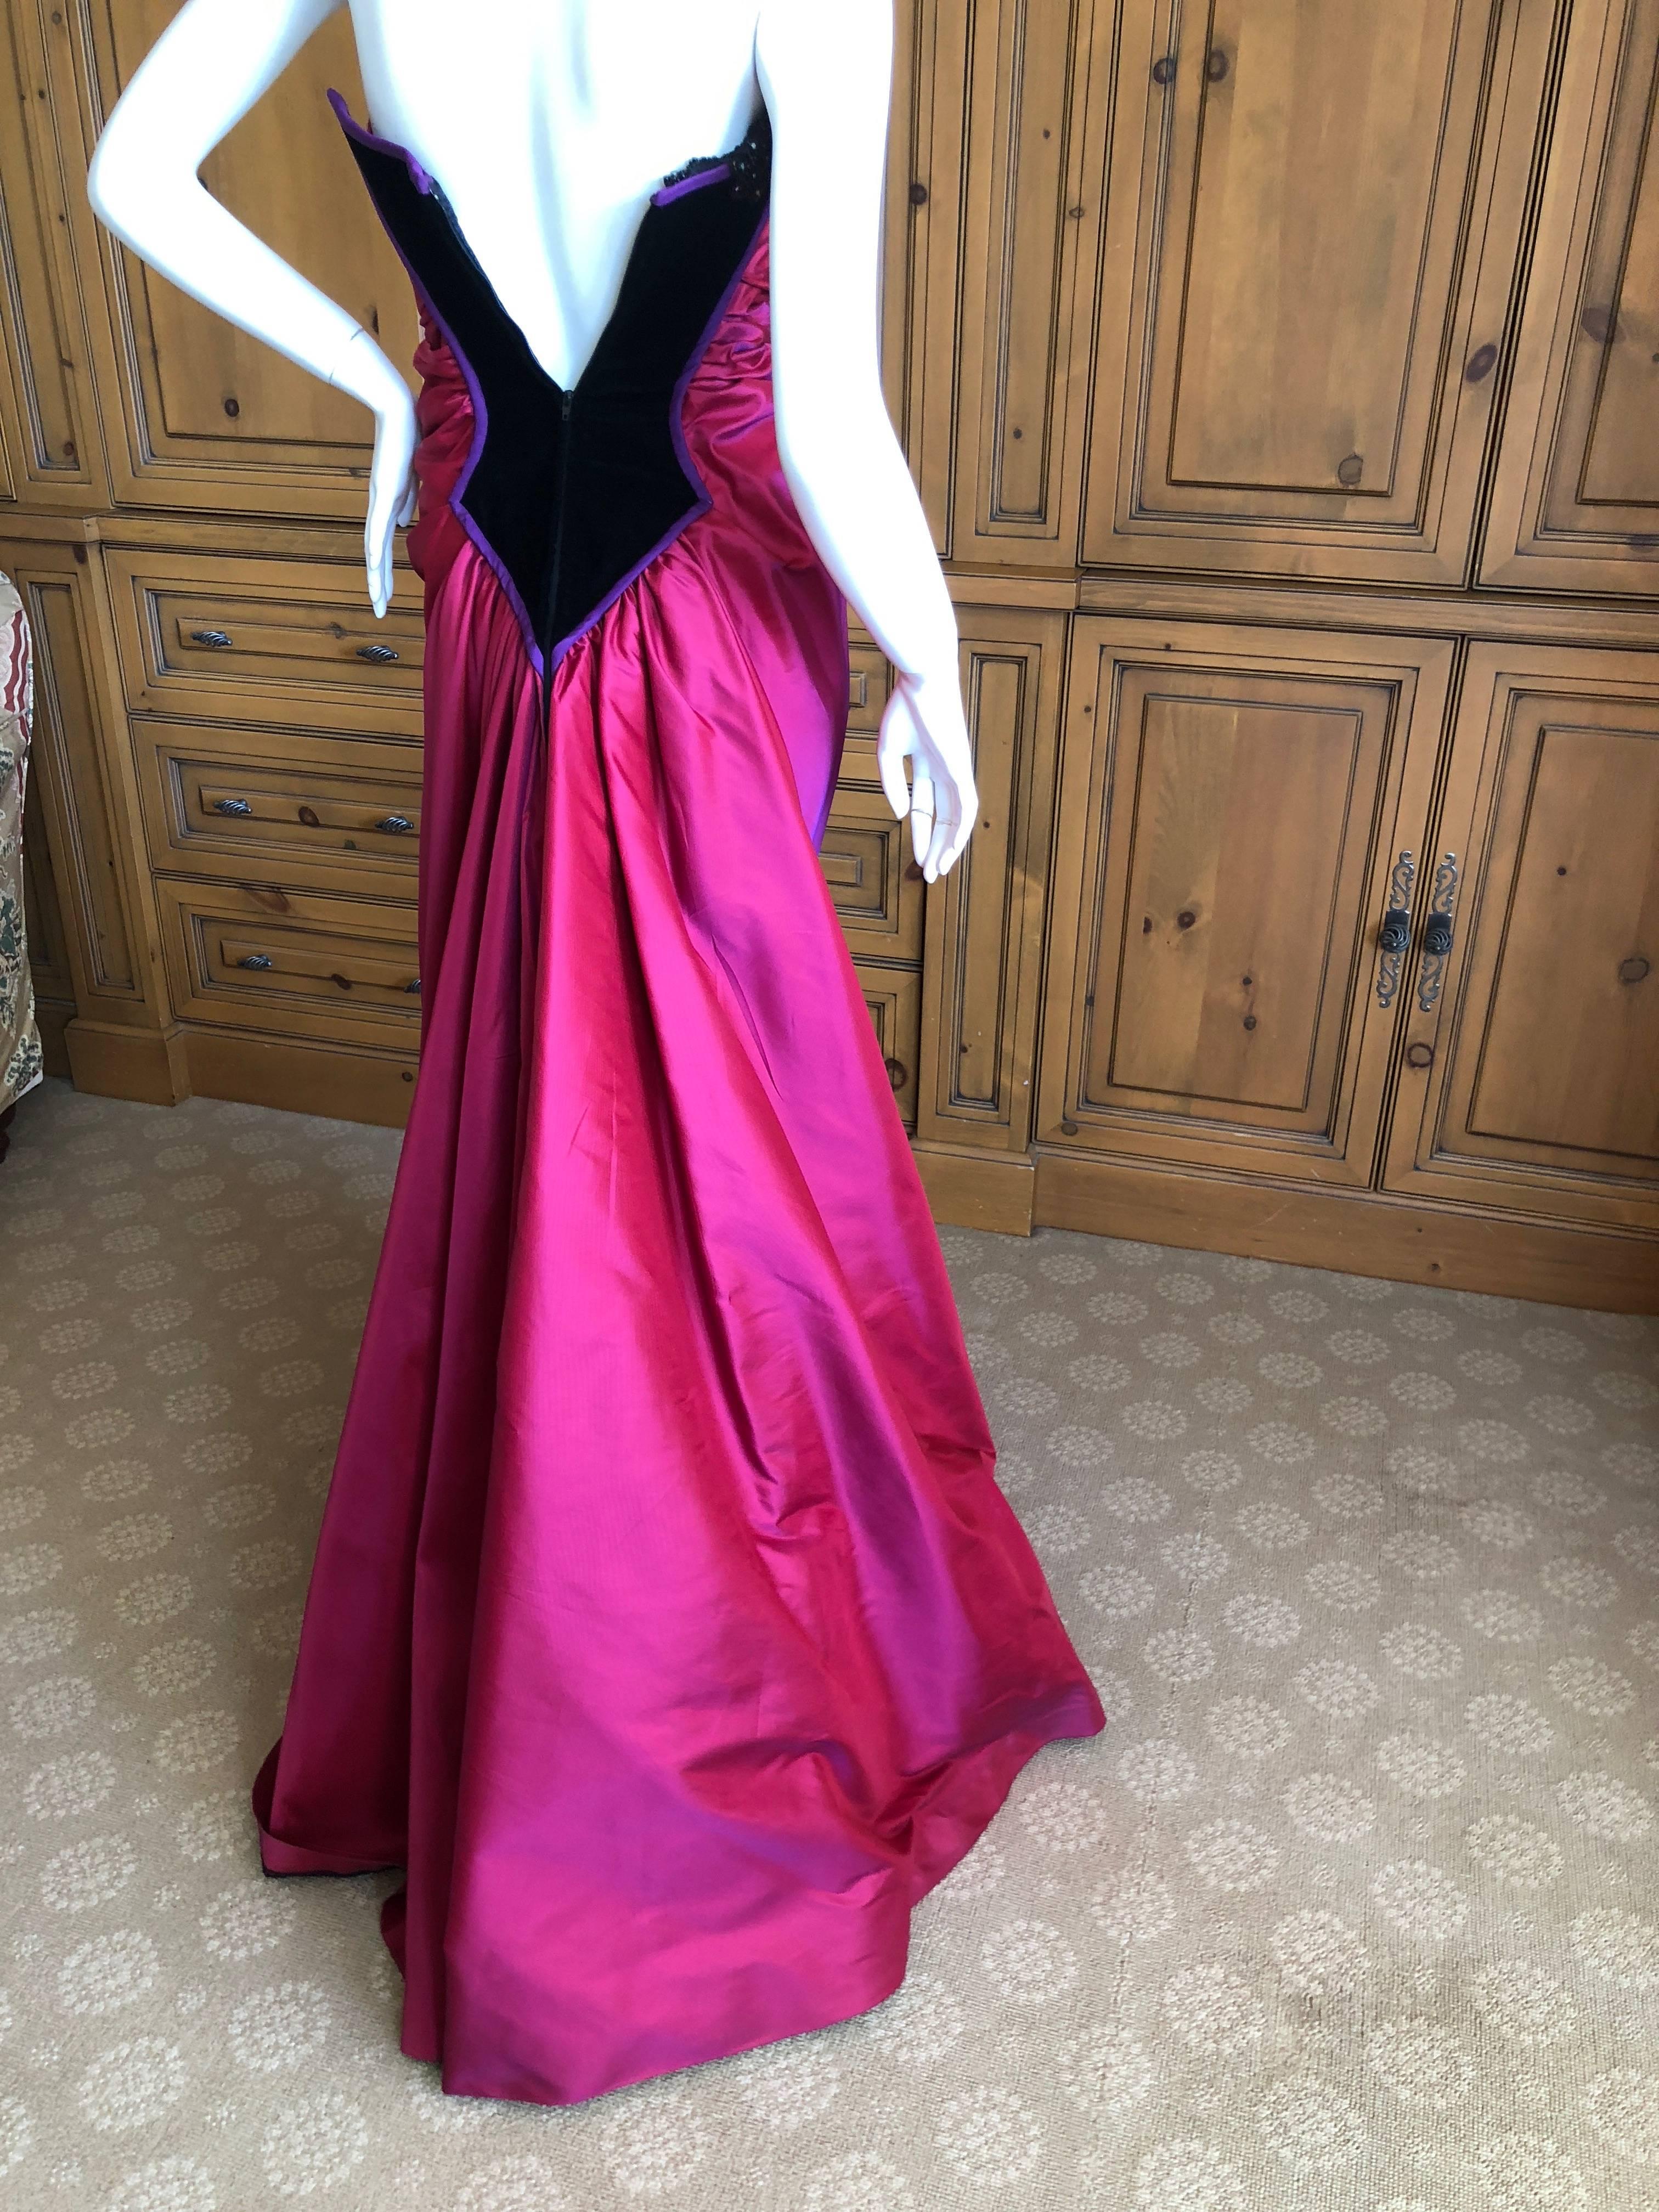 Bob Mackie 1980's Glamorous Magenta Ballgown with Crystal Beaded Accents
This is so romantic, the skirt is very full with under layers expertly draped.
The corset top is embellished with crystals at the bust.
There is a full inner corset bra.
Size